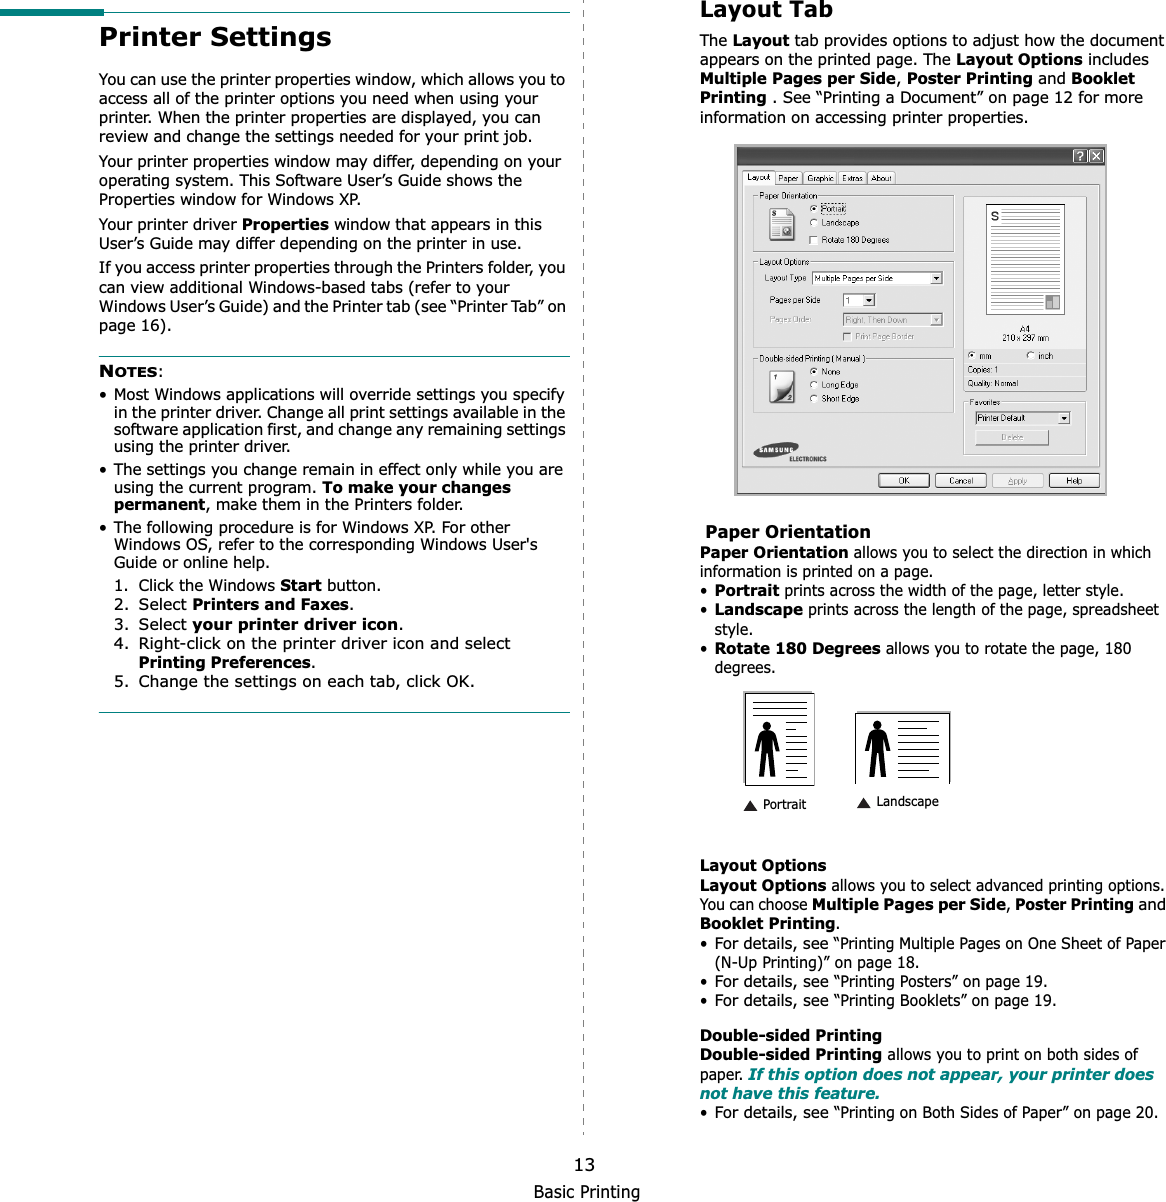 Basic Printing13Printer SettingsYou can use the printer properties window, which allows you to access all of the printer options you need when using your printer. When the printer properties are displayed, you can review and change the settings needed for your print job. Your printer properties window may differ, depending on your operating system. This Software User’s Guide shows the Properties window for Windows XP.Your printer driver Properties window that appears in this User’s Guide may differ depending on the printer in use.If you access printer properties through the Printers folder, you can view additional Windows-based tabs (refer to your Windows User’s Guide) and the Printer tab (see “Printer Tab” on page 16).NOTES:• Most Windows applications will override settings you specify in the printer driver. Change all print settings available in the software application first, and change any remaining settings using the printer driver. • The settings you change remain in effect only while you are using the current program. To make your changes permanent, make them in the Printers folder. • The following procedure is for Windows XP. For other Windows OS, refer to the corresponding Windows User&apos;s Guide or online help.1. Click the Windows Start button.2. Select Printers and Faxes.3. Select your printer driver icon.4. Right-click on the printer driver icon and select Printing Preferences.5. Change the settings on each tab, click OK.Layout TabThe Layout tab provides options to adjust how the document appears on the printed page. The Layout Options includes Multiple Pages per Side,Poster Printing and Booklet Printing . See “Printing a Document” on page 12 for more information on accessing printer properties.  Paper OrientationPaper Orientation allows you to select the direction in which information is printed on a page. •Portrait prints across the width of the page, letter style. •Landscape prints across the length of the page, spreadsheet style. •Rotate 180 Degrees allows you to rotate the page, 180 degrees.Layout OptionsLayout Options allows you to select advanced printing options. You can choose Multiple Pages per Side,Poster Printingand Booklet Printing.•For details, see “Printing Multiple Pages on One Sheet of Paper (N-Up Printing)” on page 18.•For details, see “Printing Posters” on page 19.•For details, see “Printing Booklets” on page 19.Double-sided PrintingDouble-sided Printing allows you to print on both sides of paper. If this option does not appear, your printer does not have this feature.•For details, see “Printing on Both Sides of Paper” on page 20. Landscape Portrait